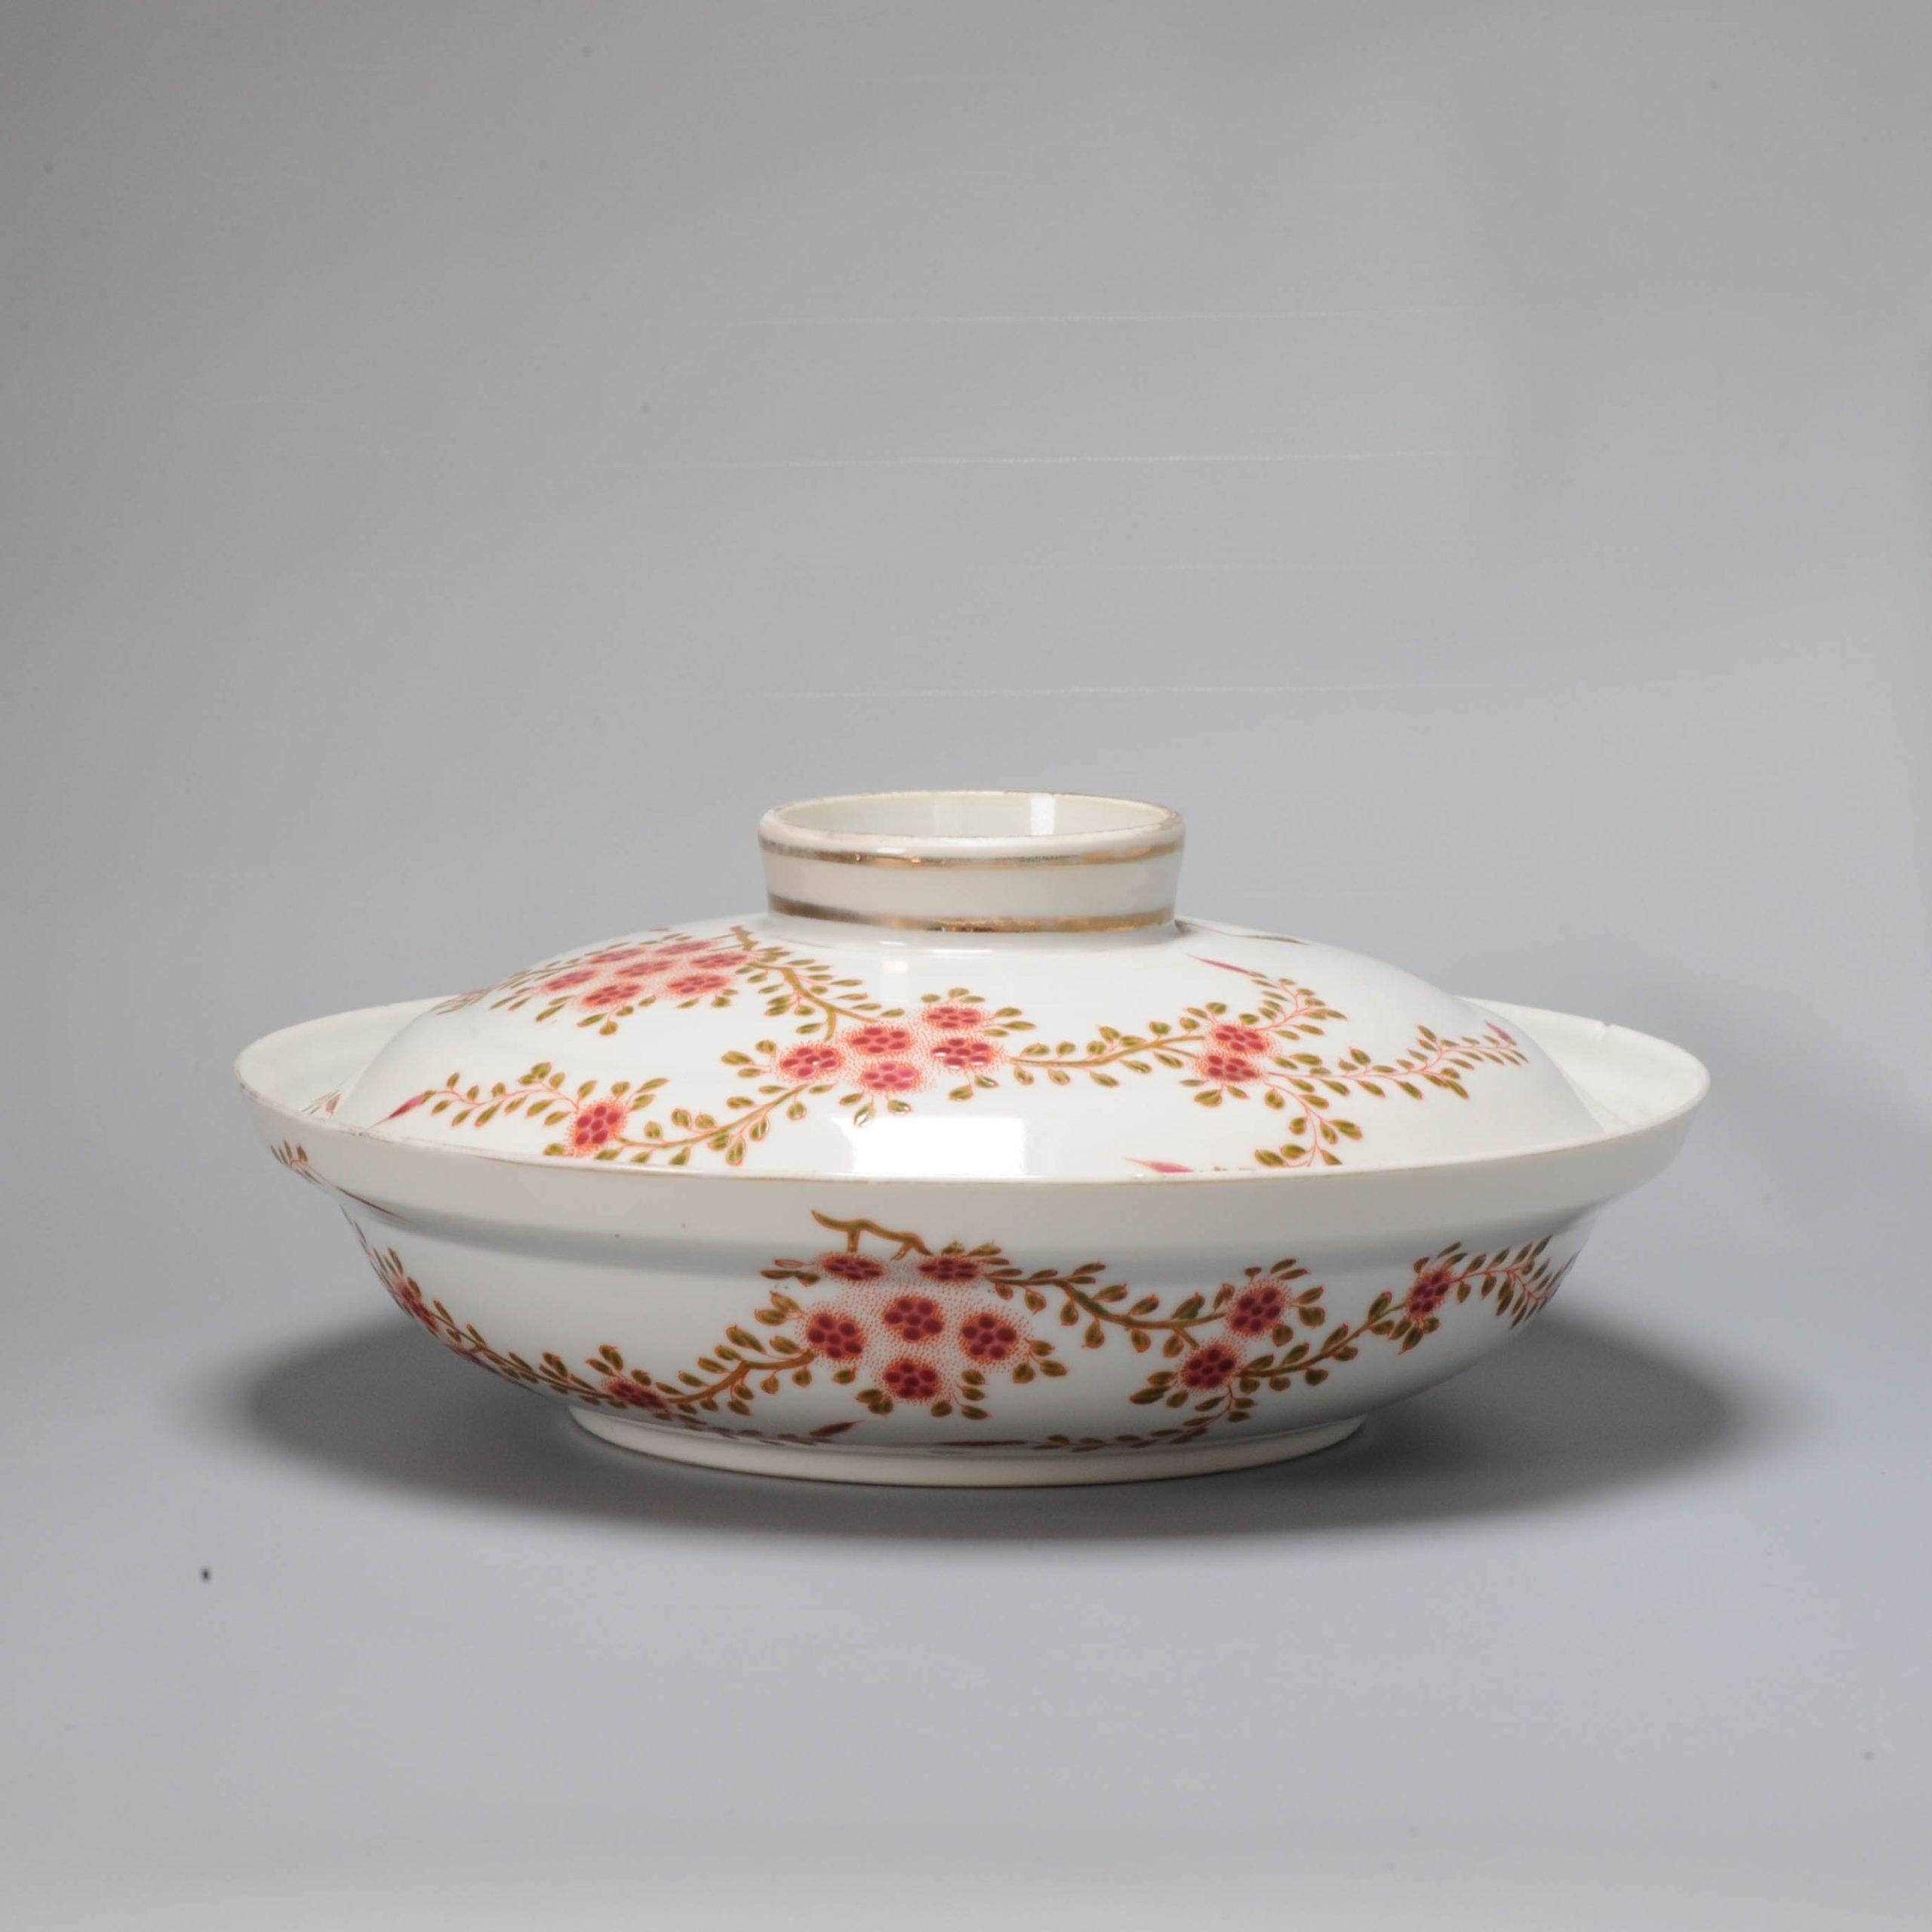 Antique Chinese Porcelain Republic Period Marked Tureen Flowers China In Fair Condition For Sale In Amsterdam, Noord Holland